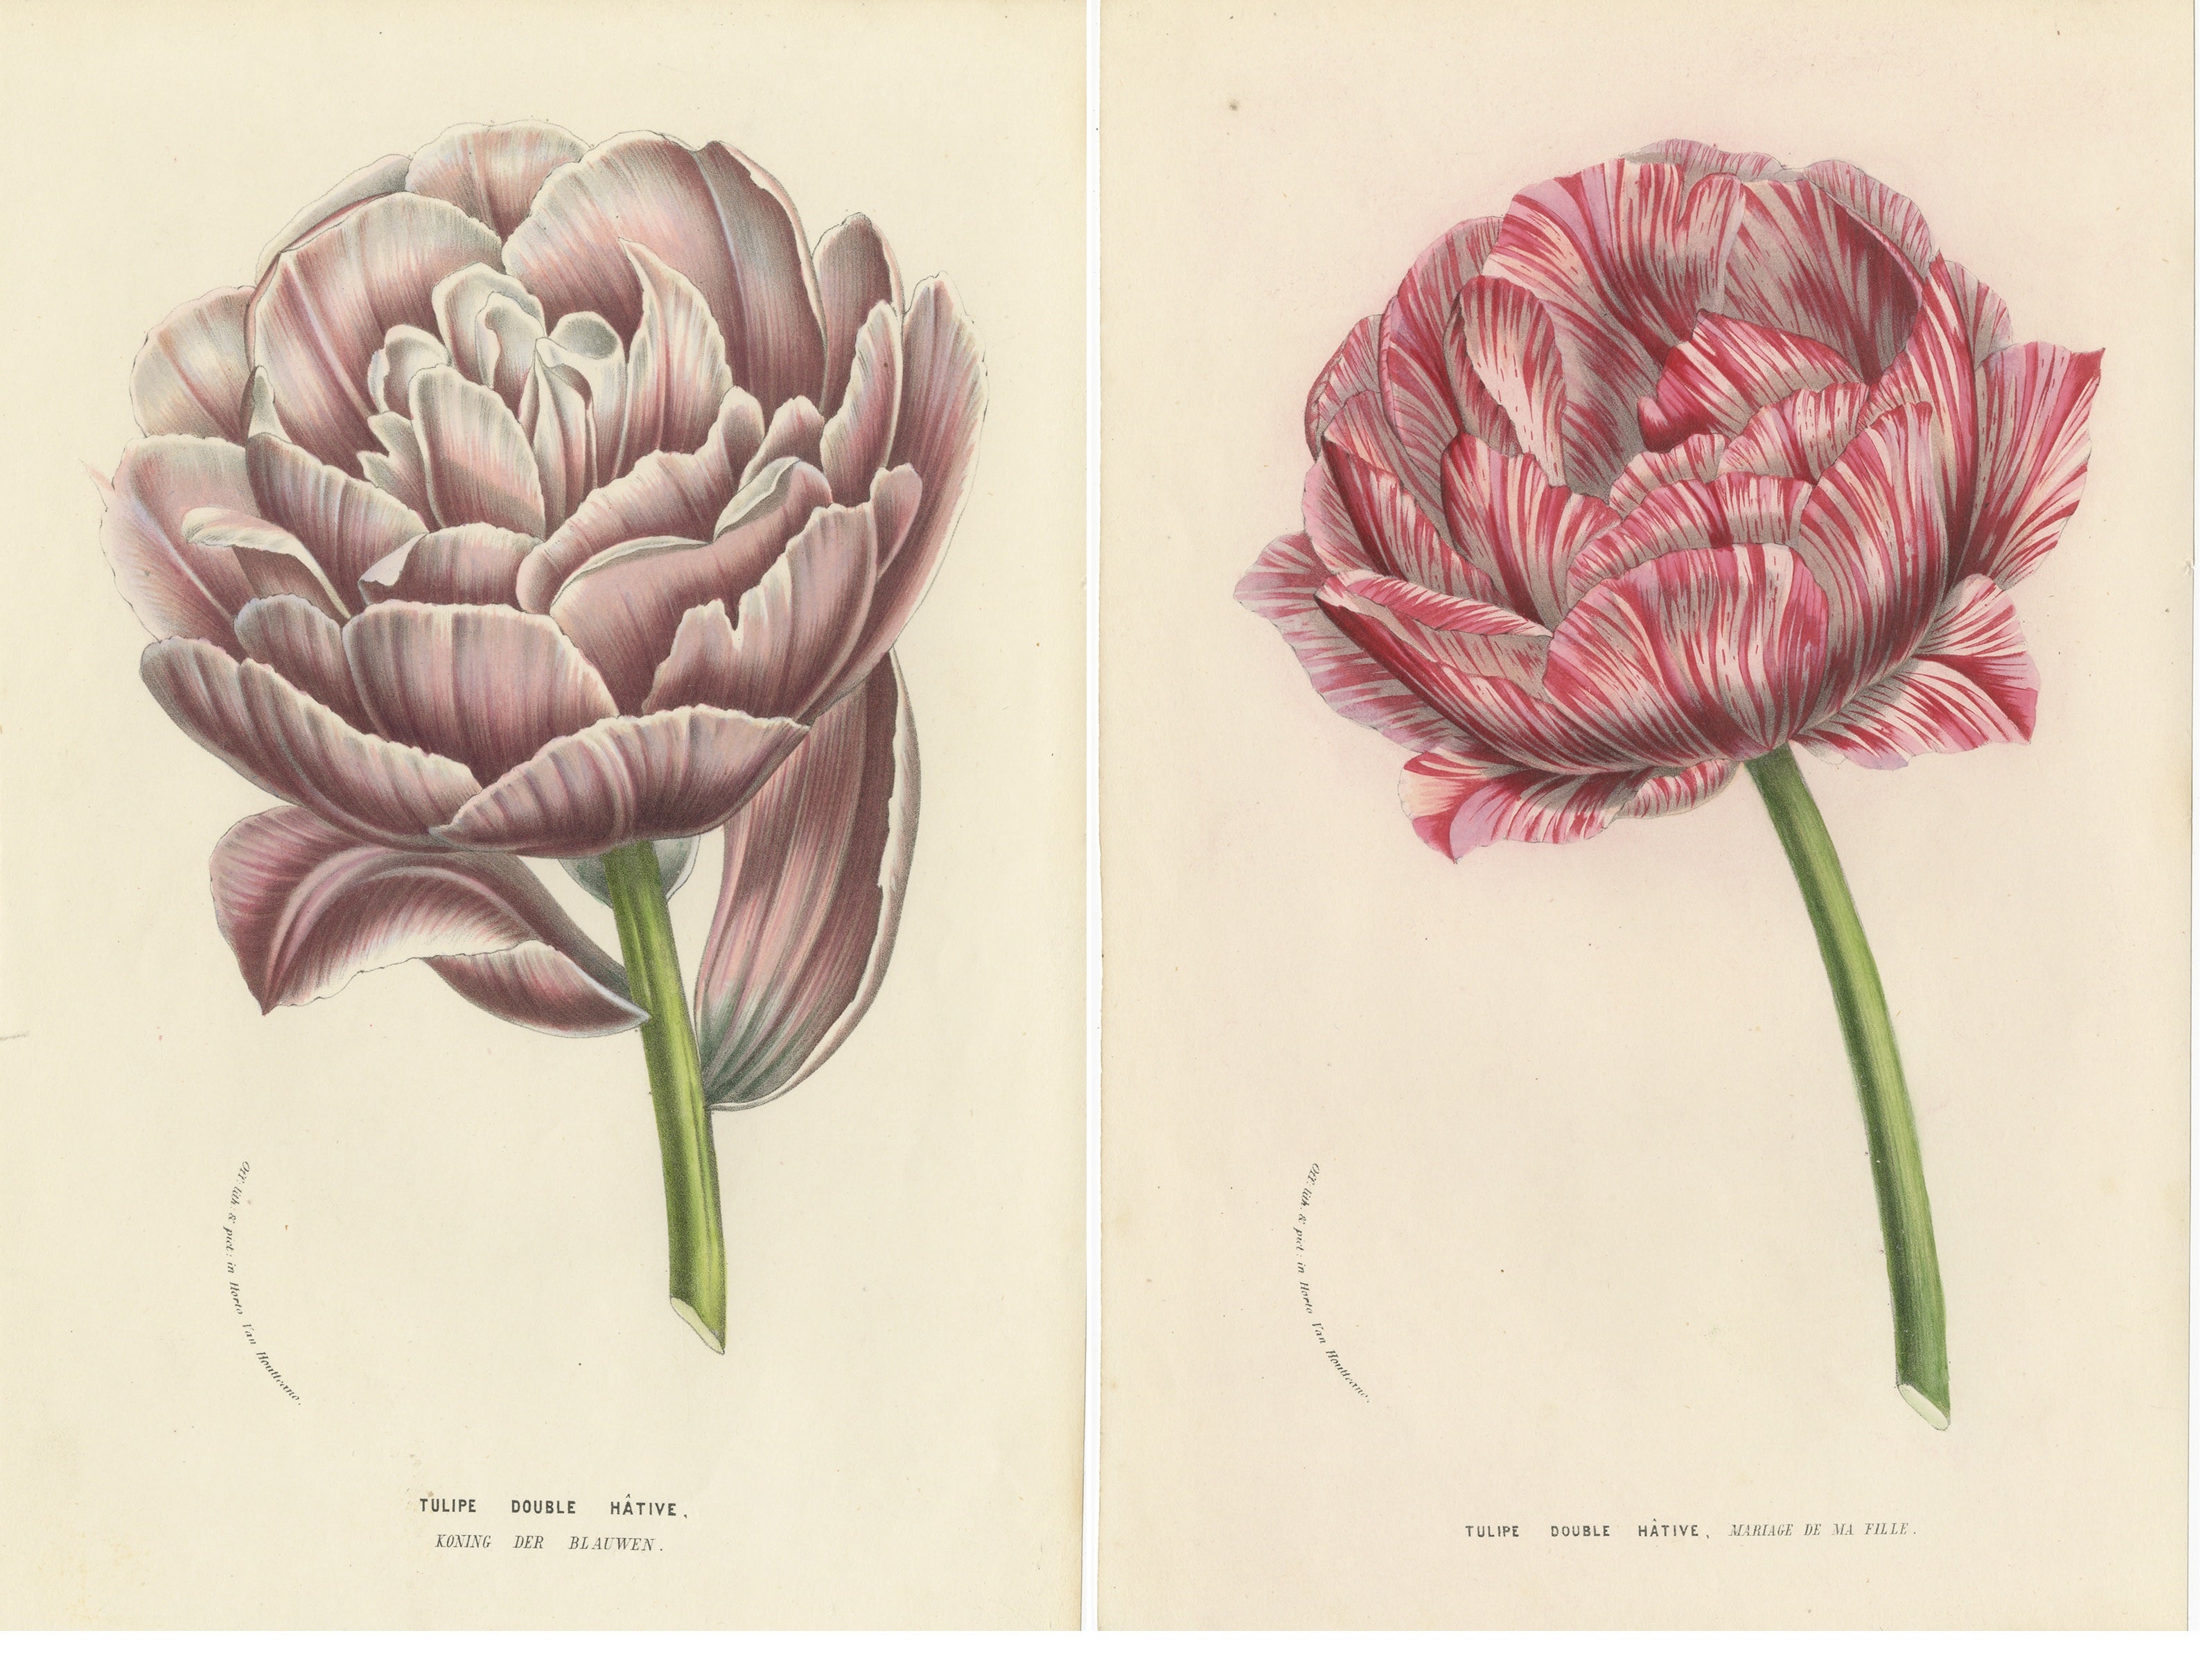 Set of 2 Antique Botany Prints of Various Tulips by Van Houtte, 1857